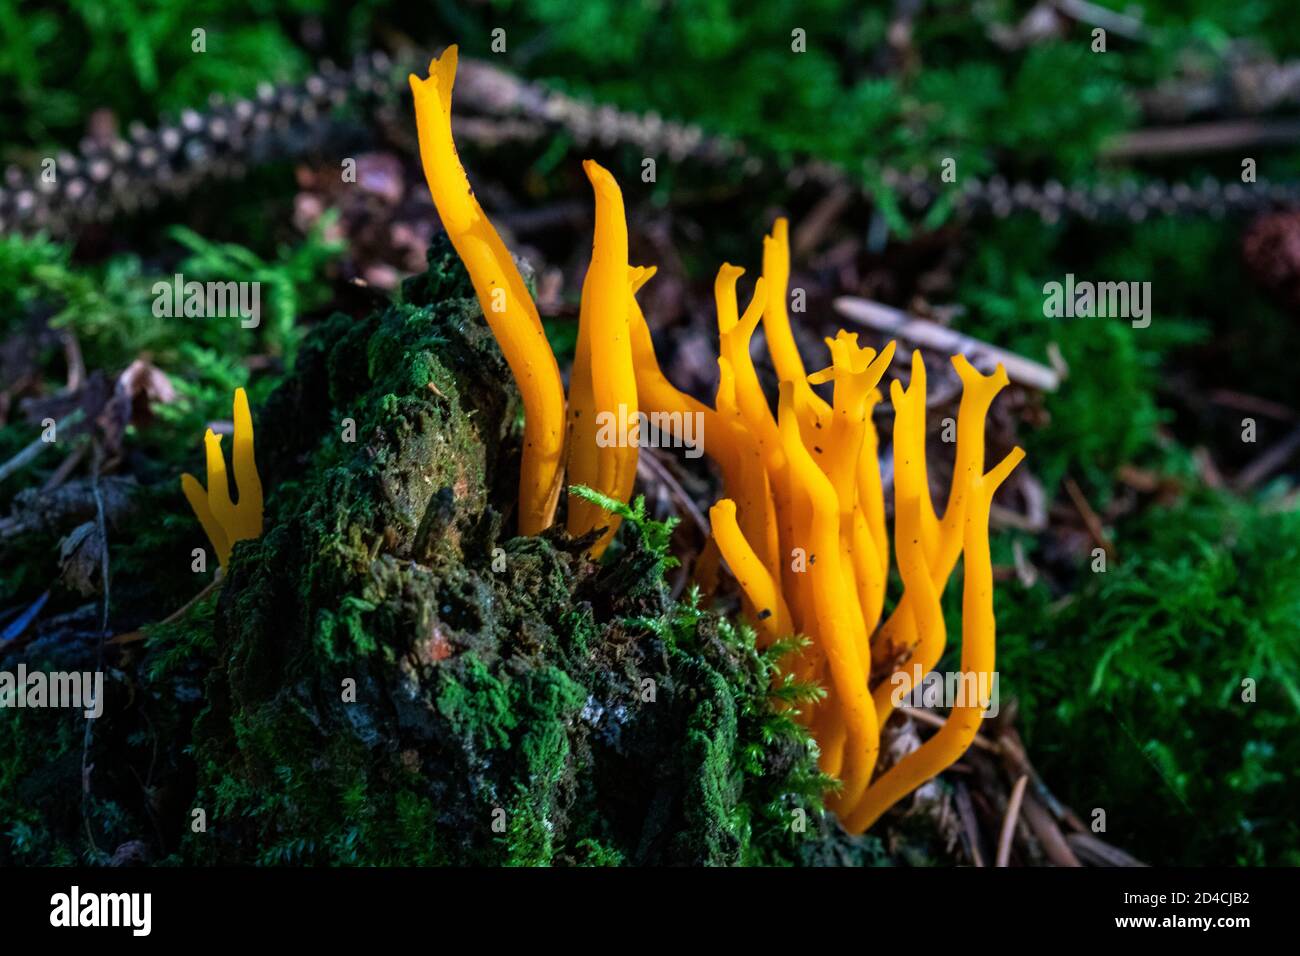 Bright Yellow Stagshorn Fungus (Calocera viscosa) Growing on a Rotting Pine Stump With Moss #2. Great Torrington, Devon, England. Stock Photo